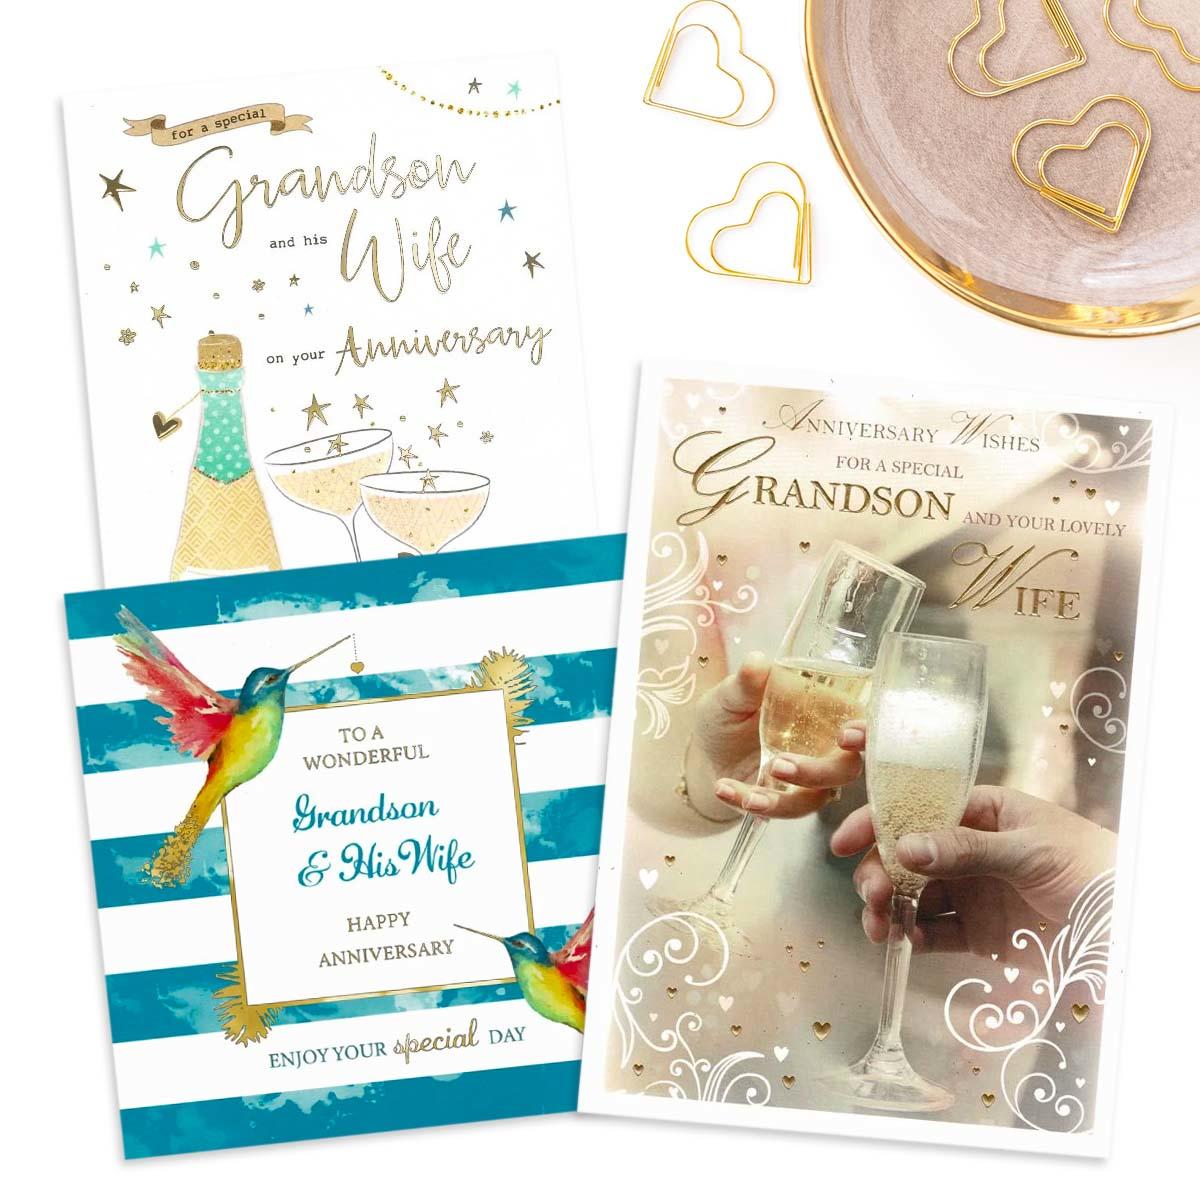 A Selection Of Cards To Show The Depth Of Range In Our Grandson And Wife Anniversary Section